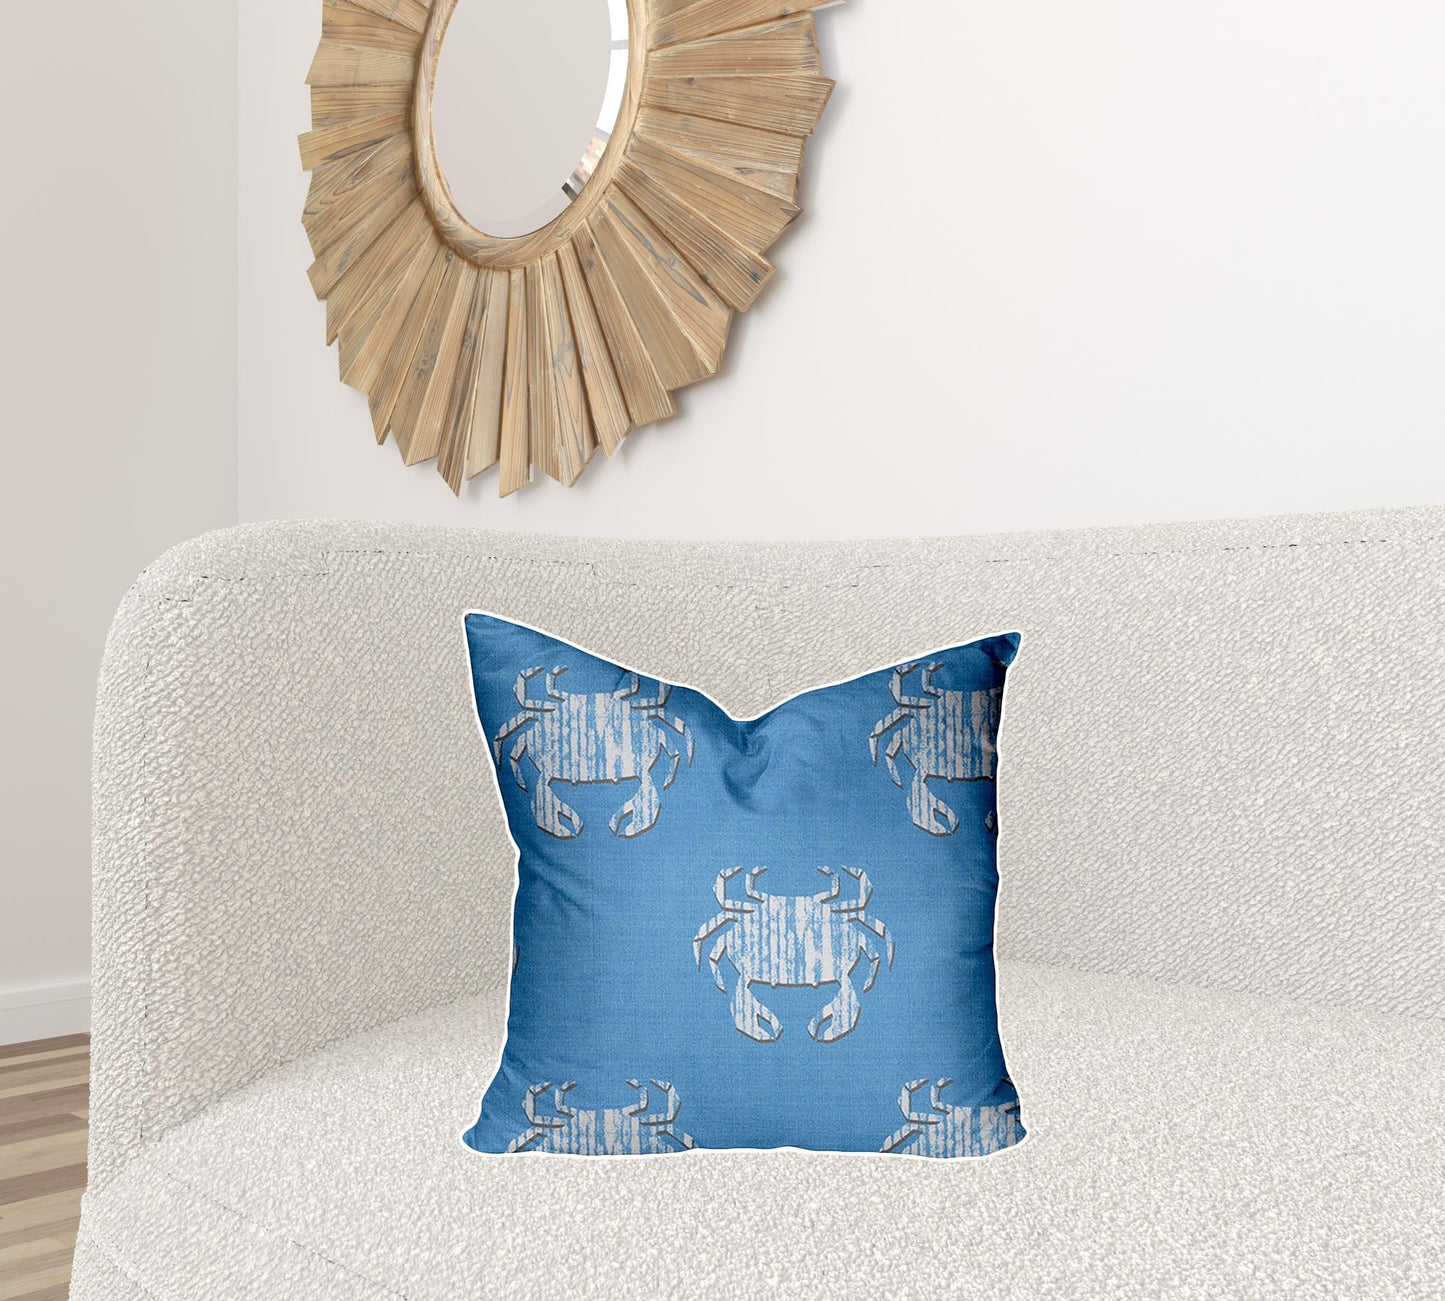 20" X 20" Blue And White Crab Zippered Coastal Throw Indoor Outdoor Pillow